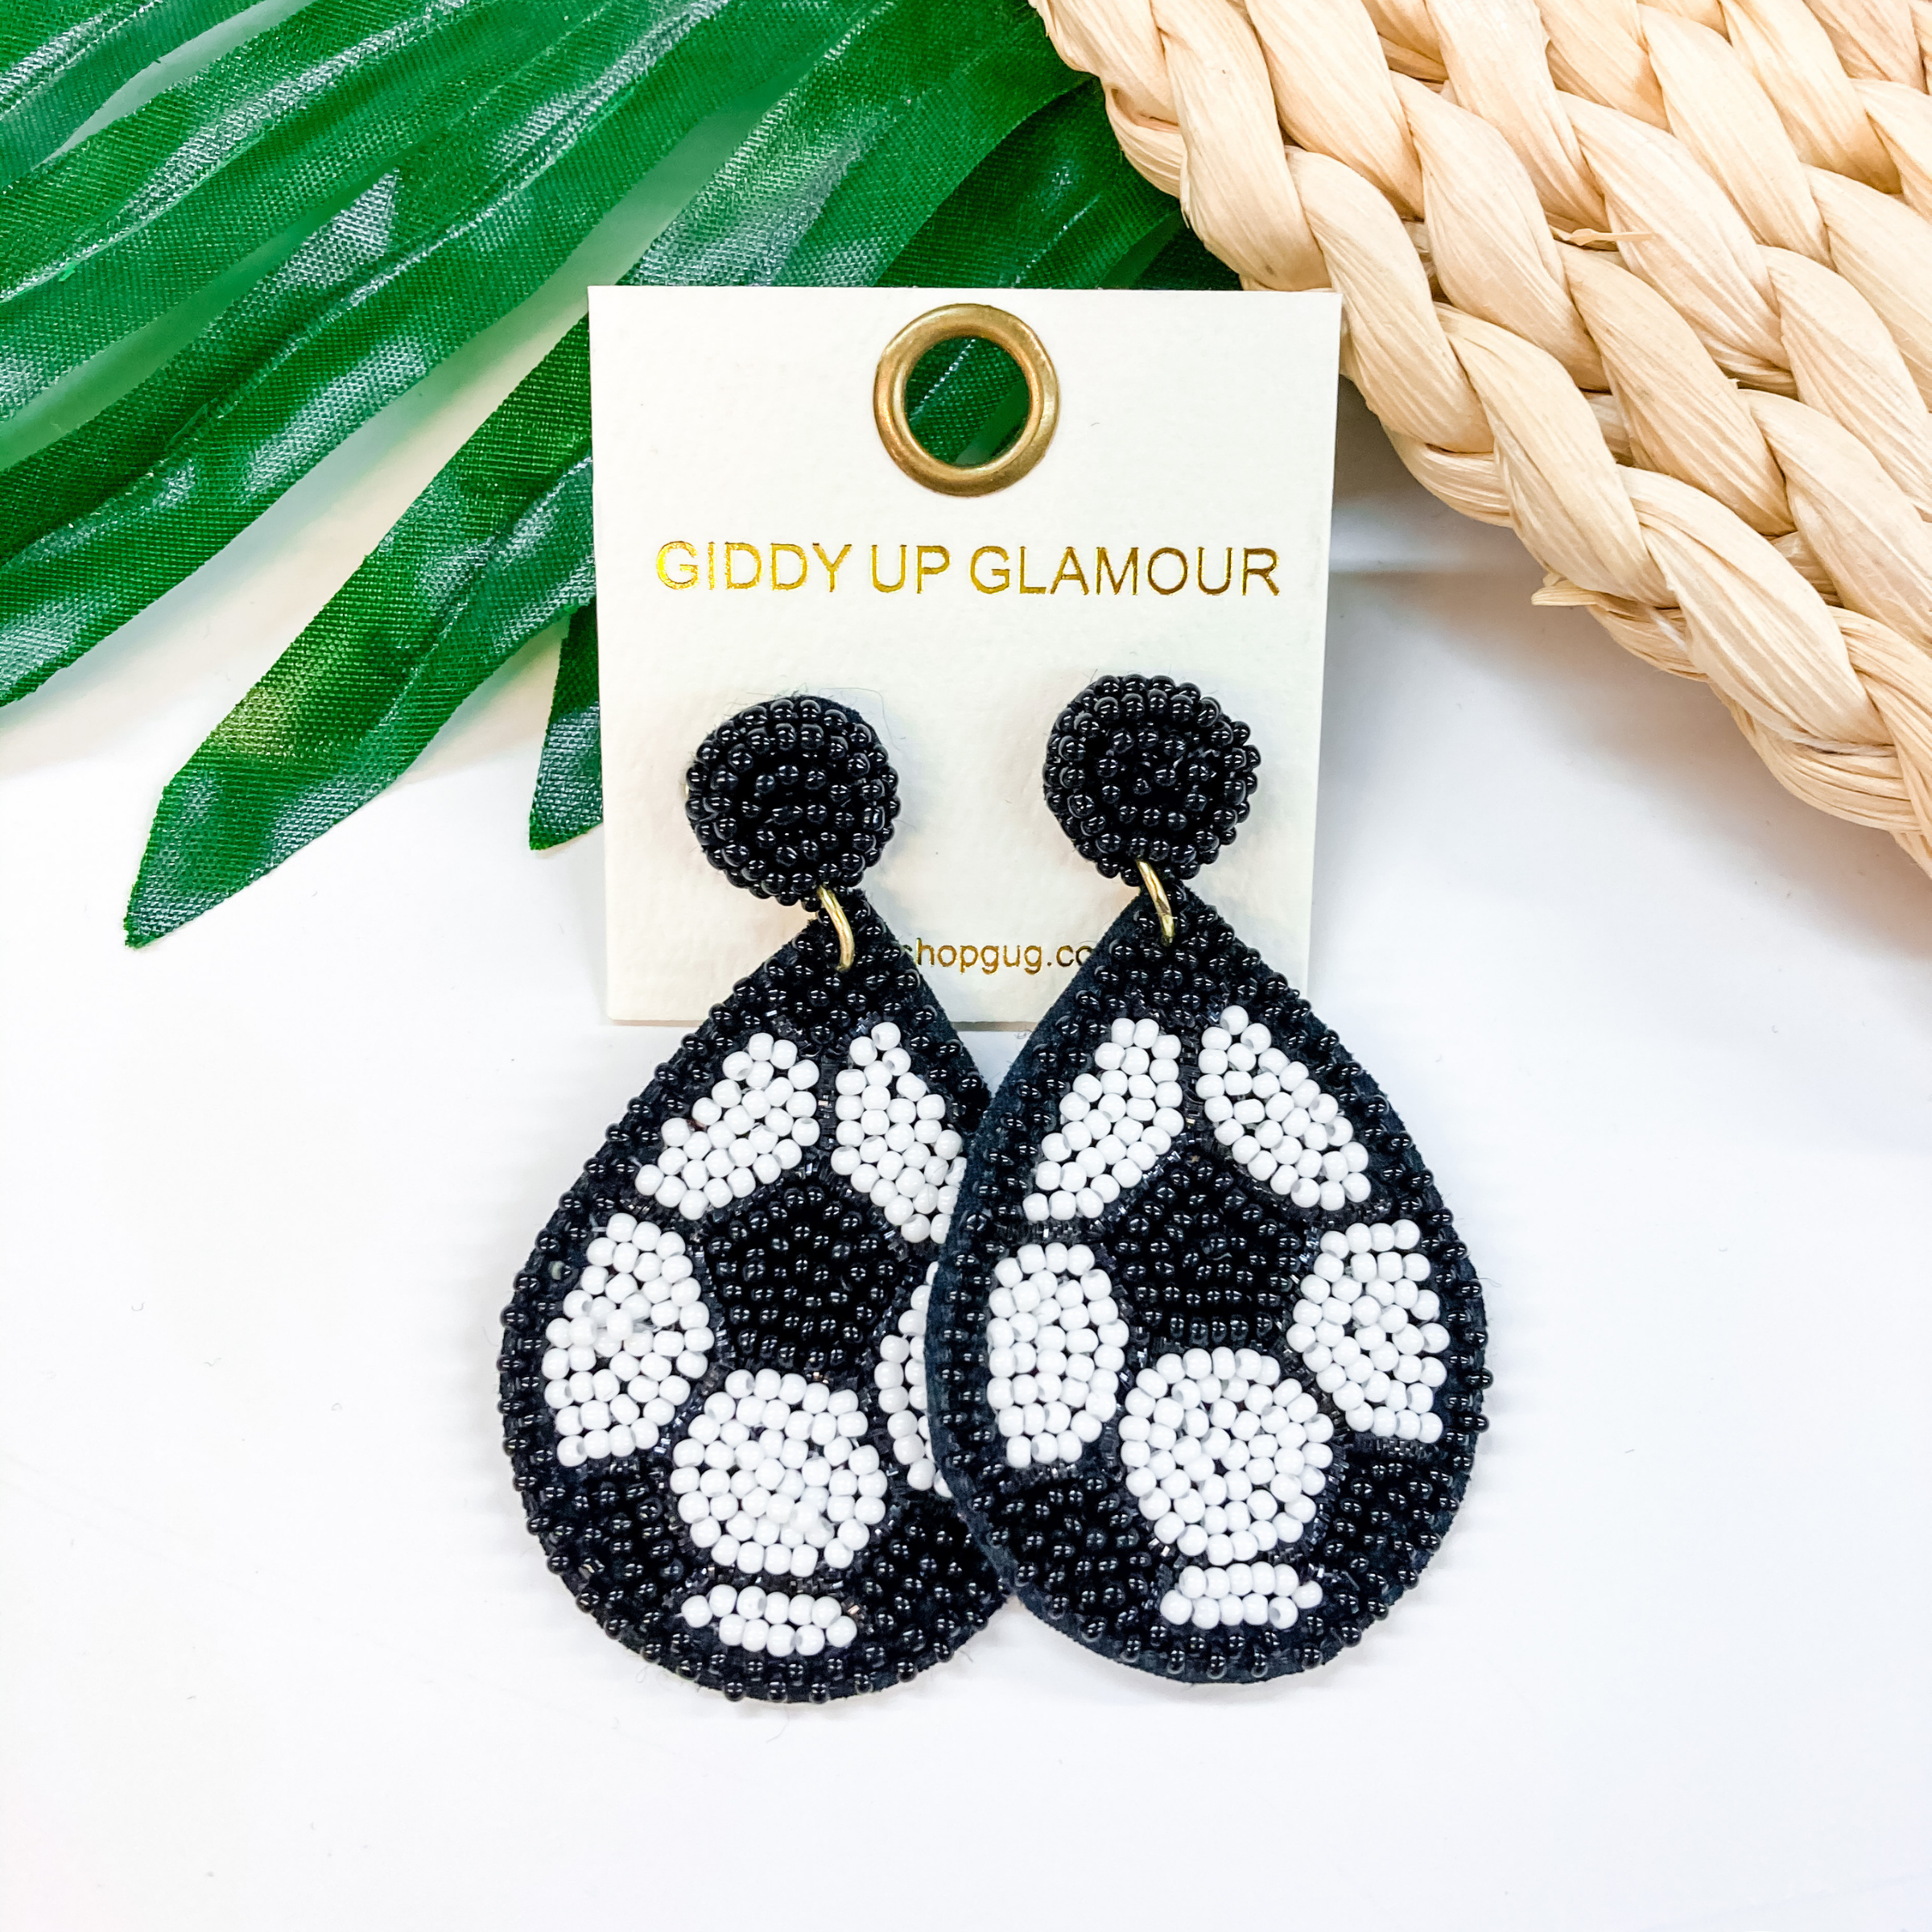 Seed Bead Teardrop Soccer Earrings - Giddy Up Glamour Boutique